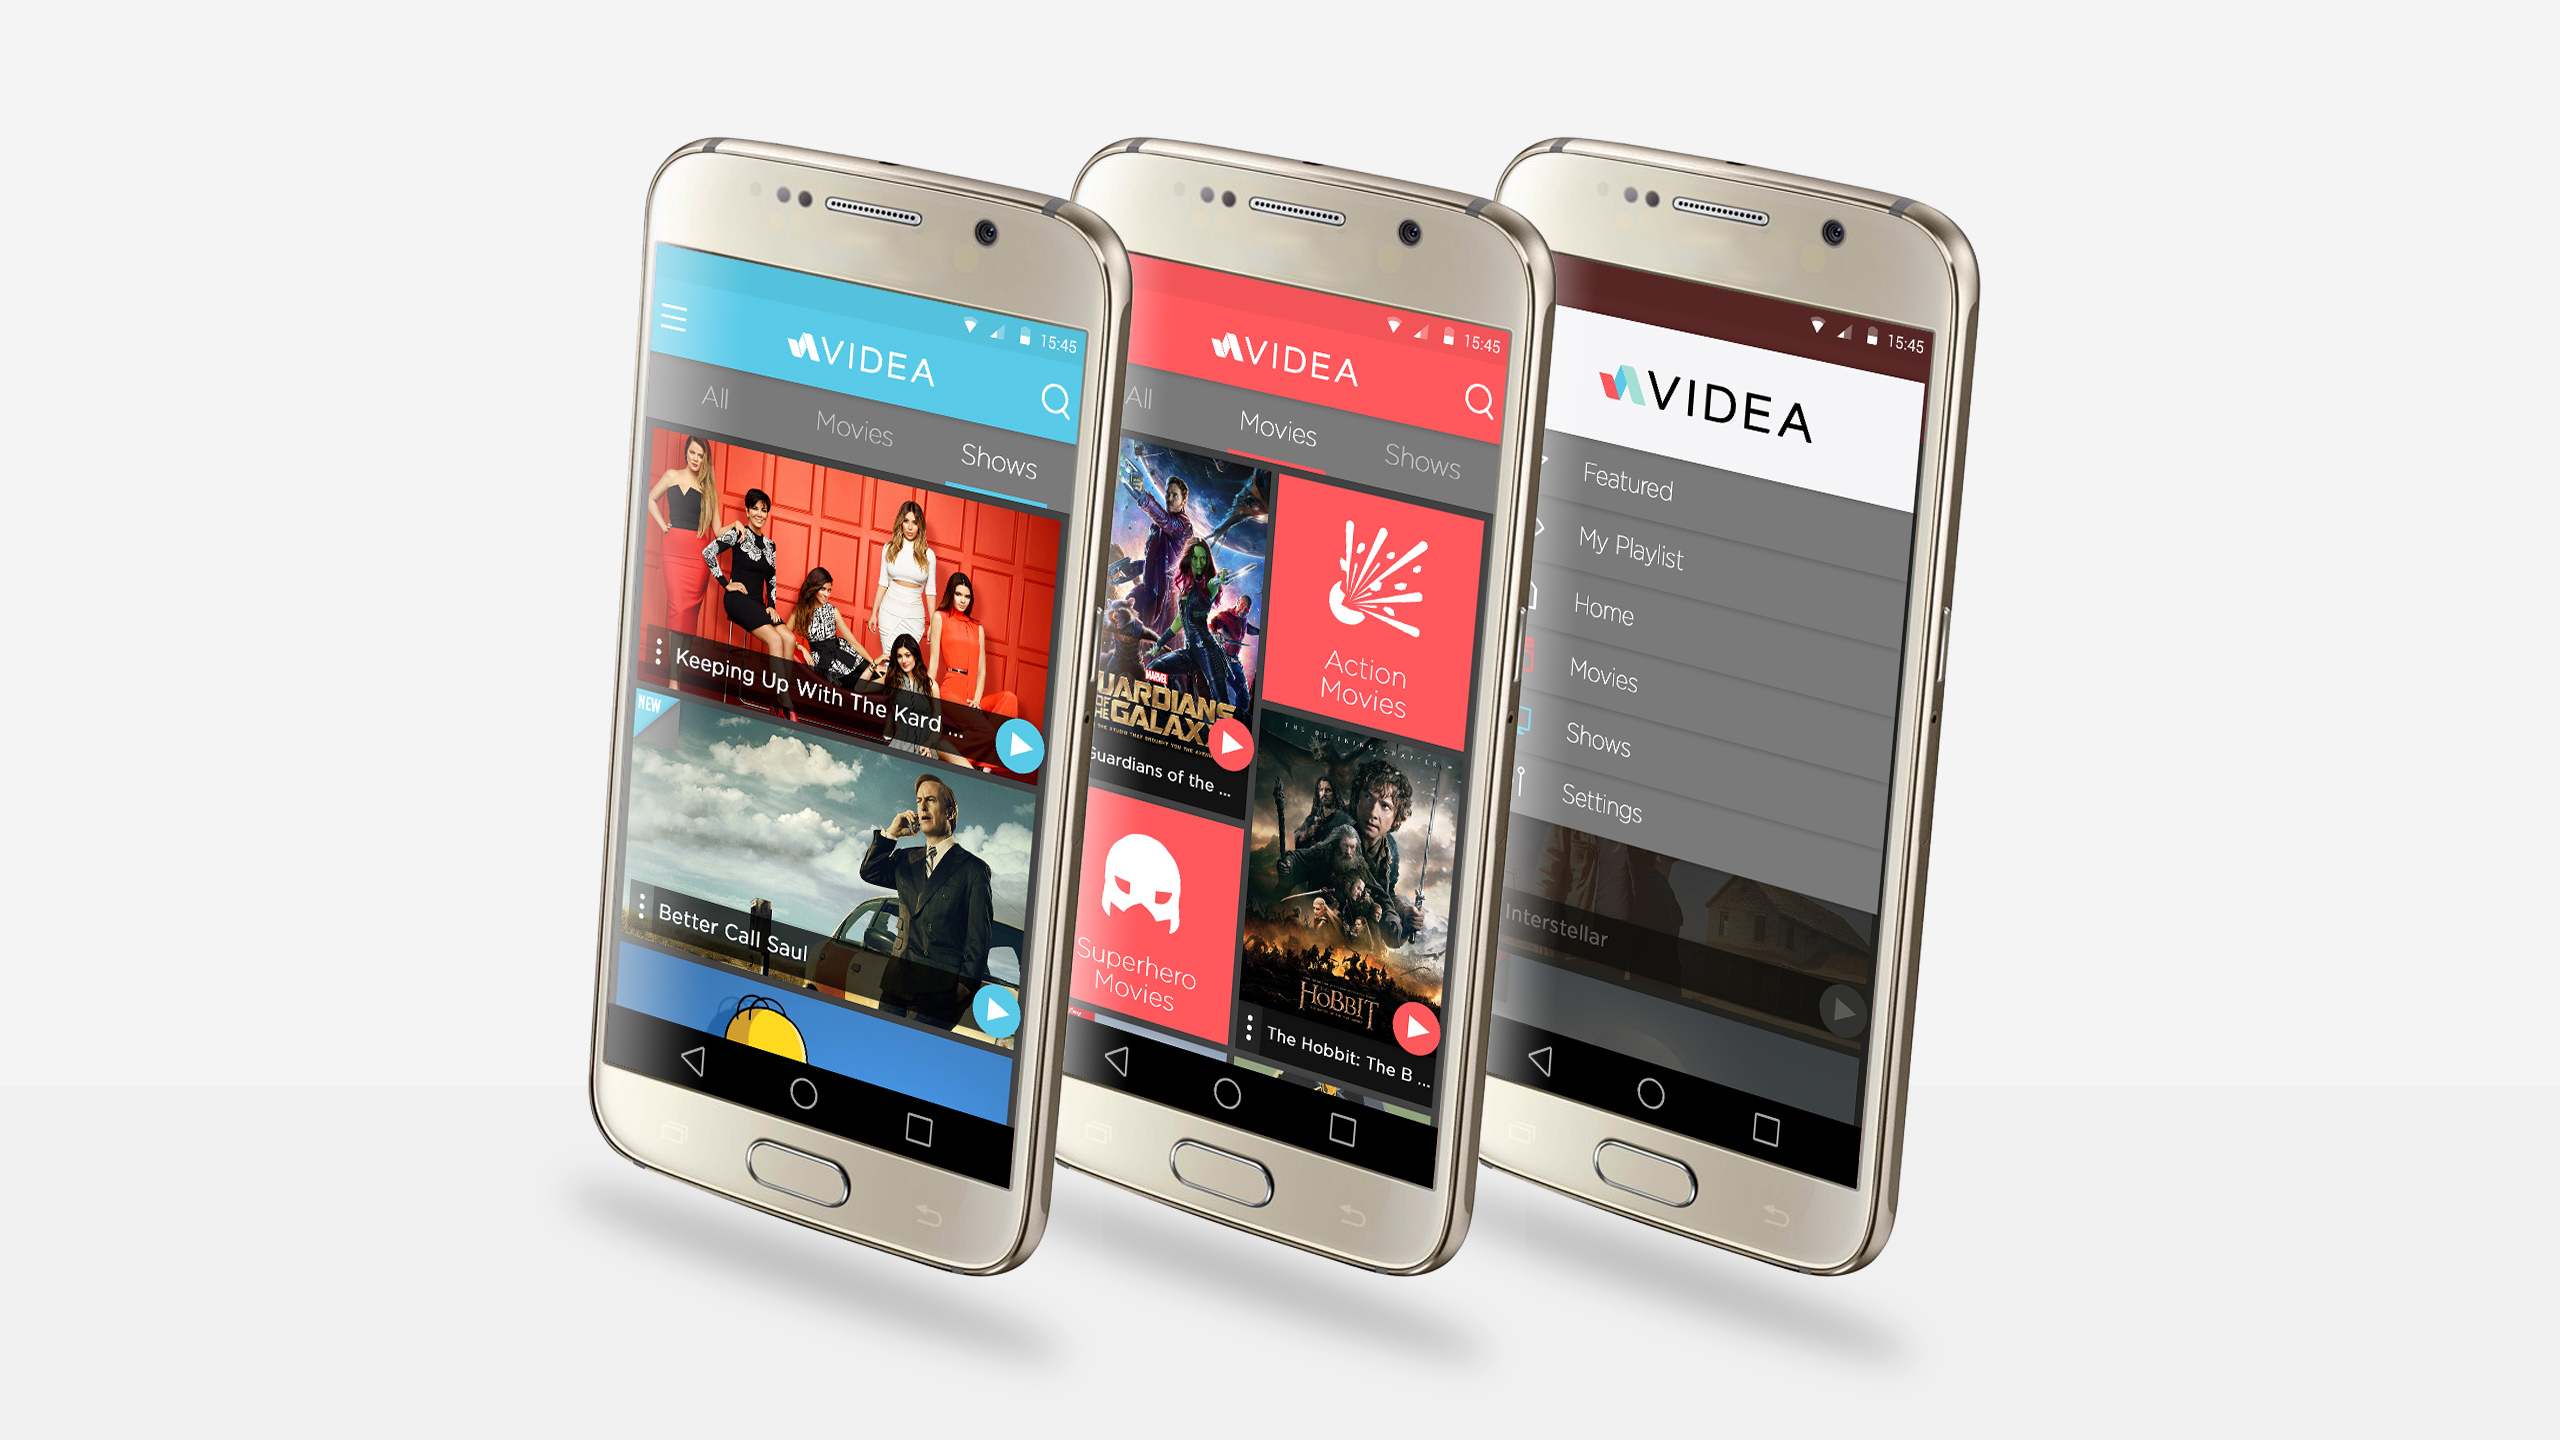 App design for Videa by The Coopers